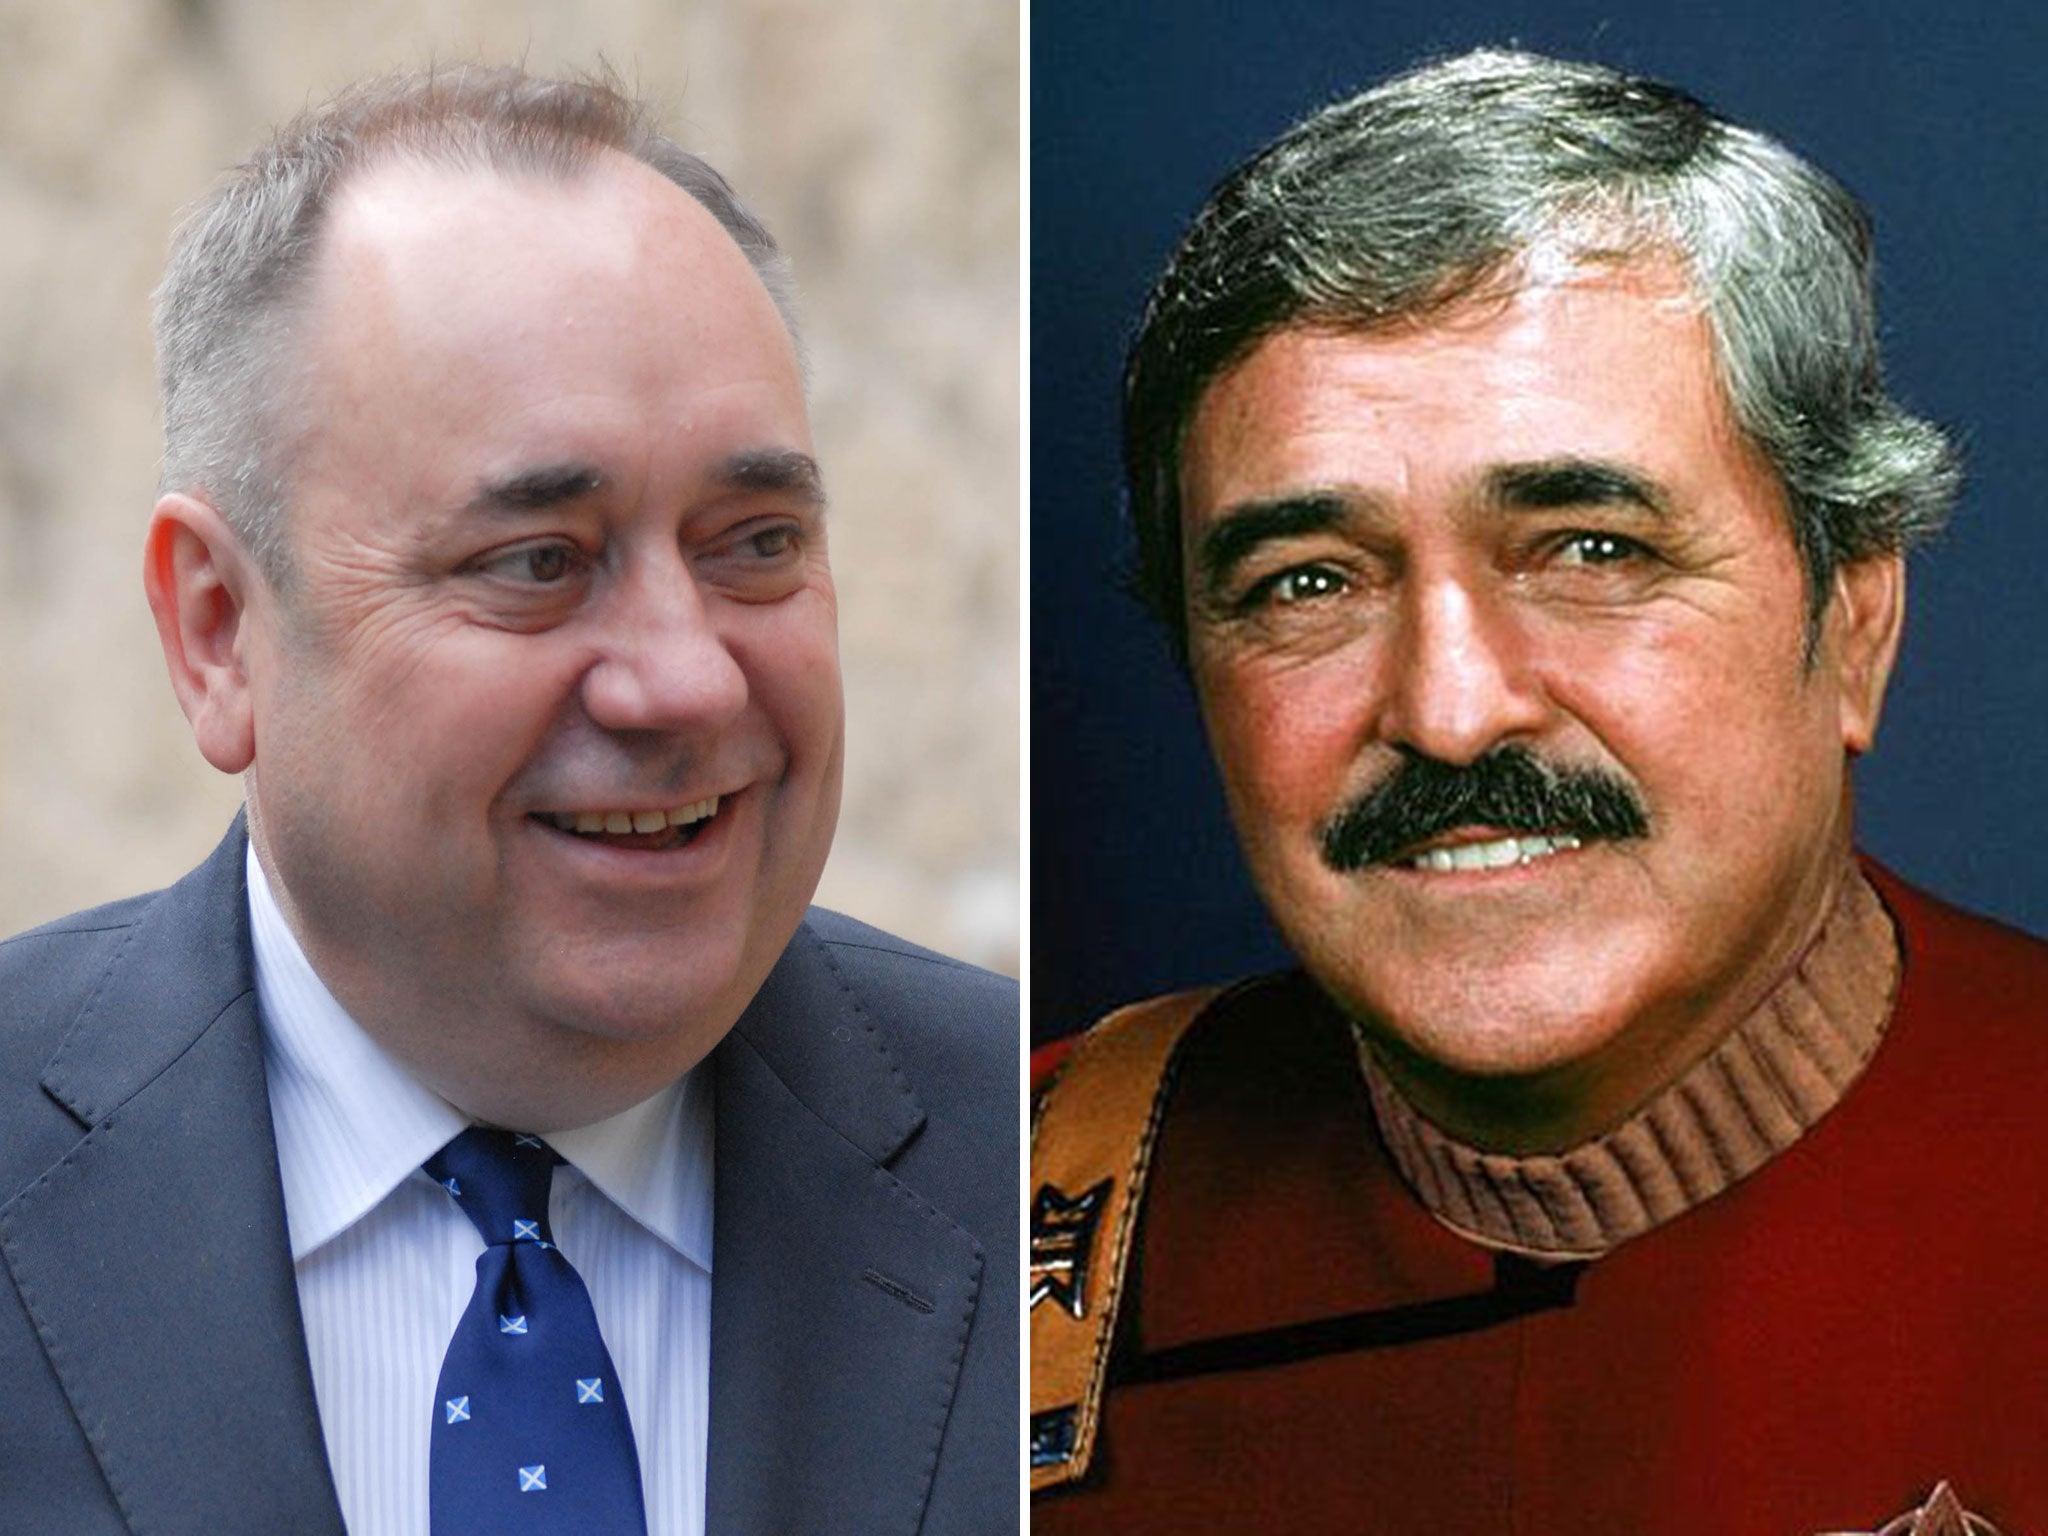 Salmond told a Scottish television chat show in 2001that he would also sit in front of a mirror and say things like, "Captain, we have a 2,499.99-to-one chance of surviving this" in his Vulcan voice